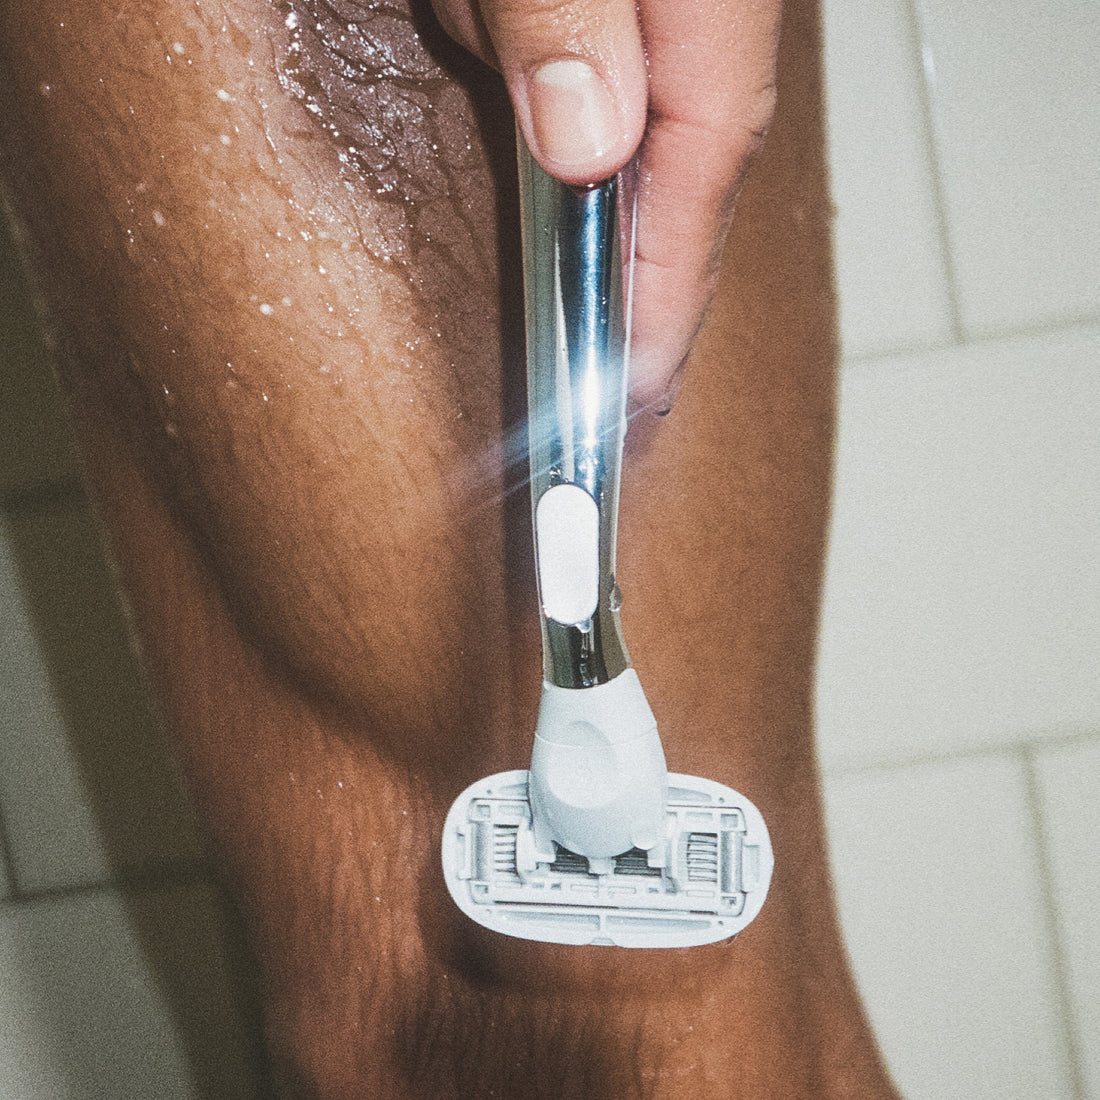 Closeup of a person holding a Flamingo Polished Chrome Razor in front of their leg in the bathroom